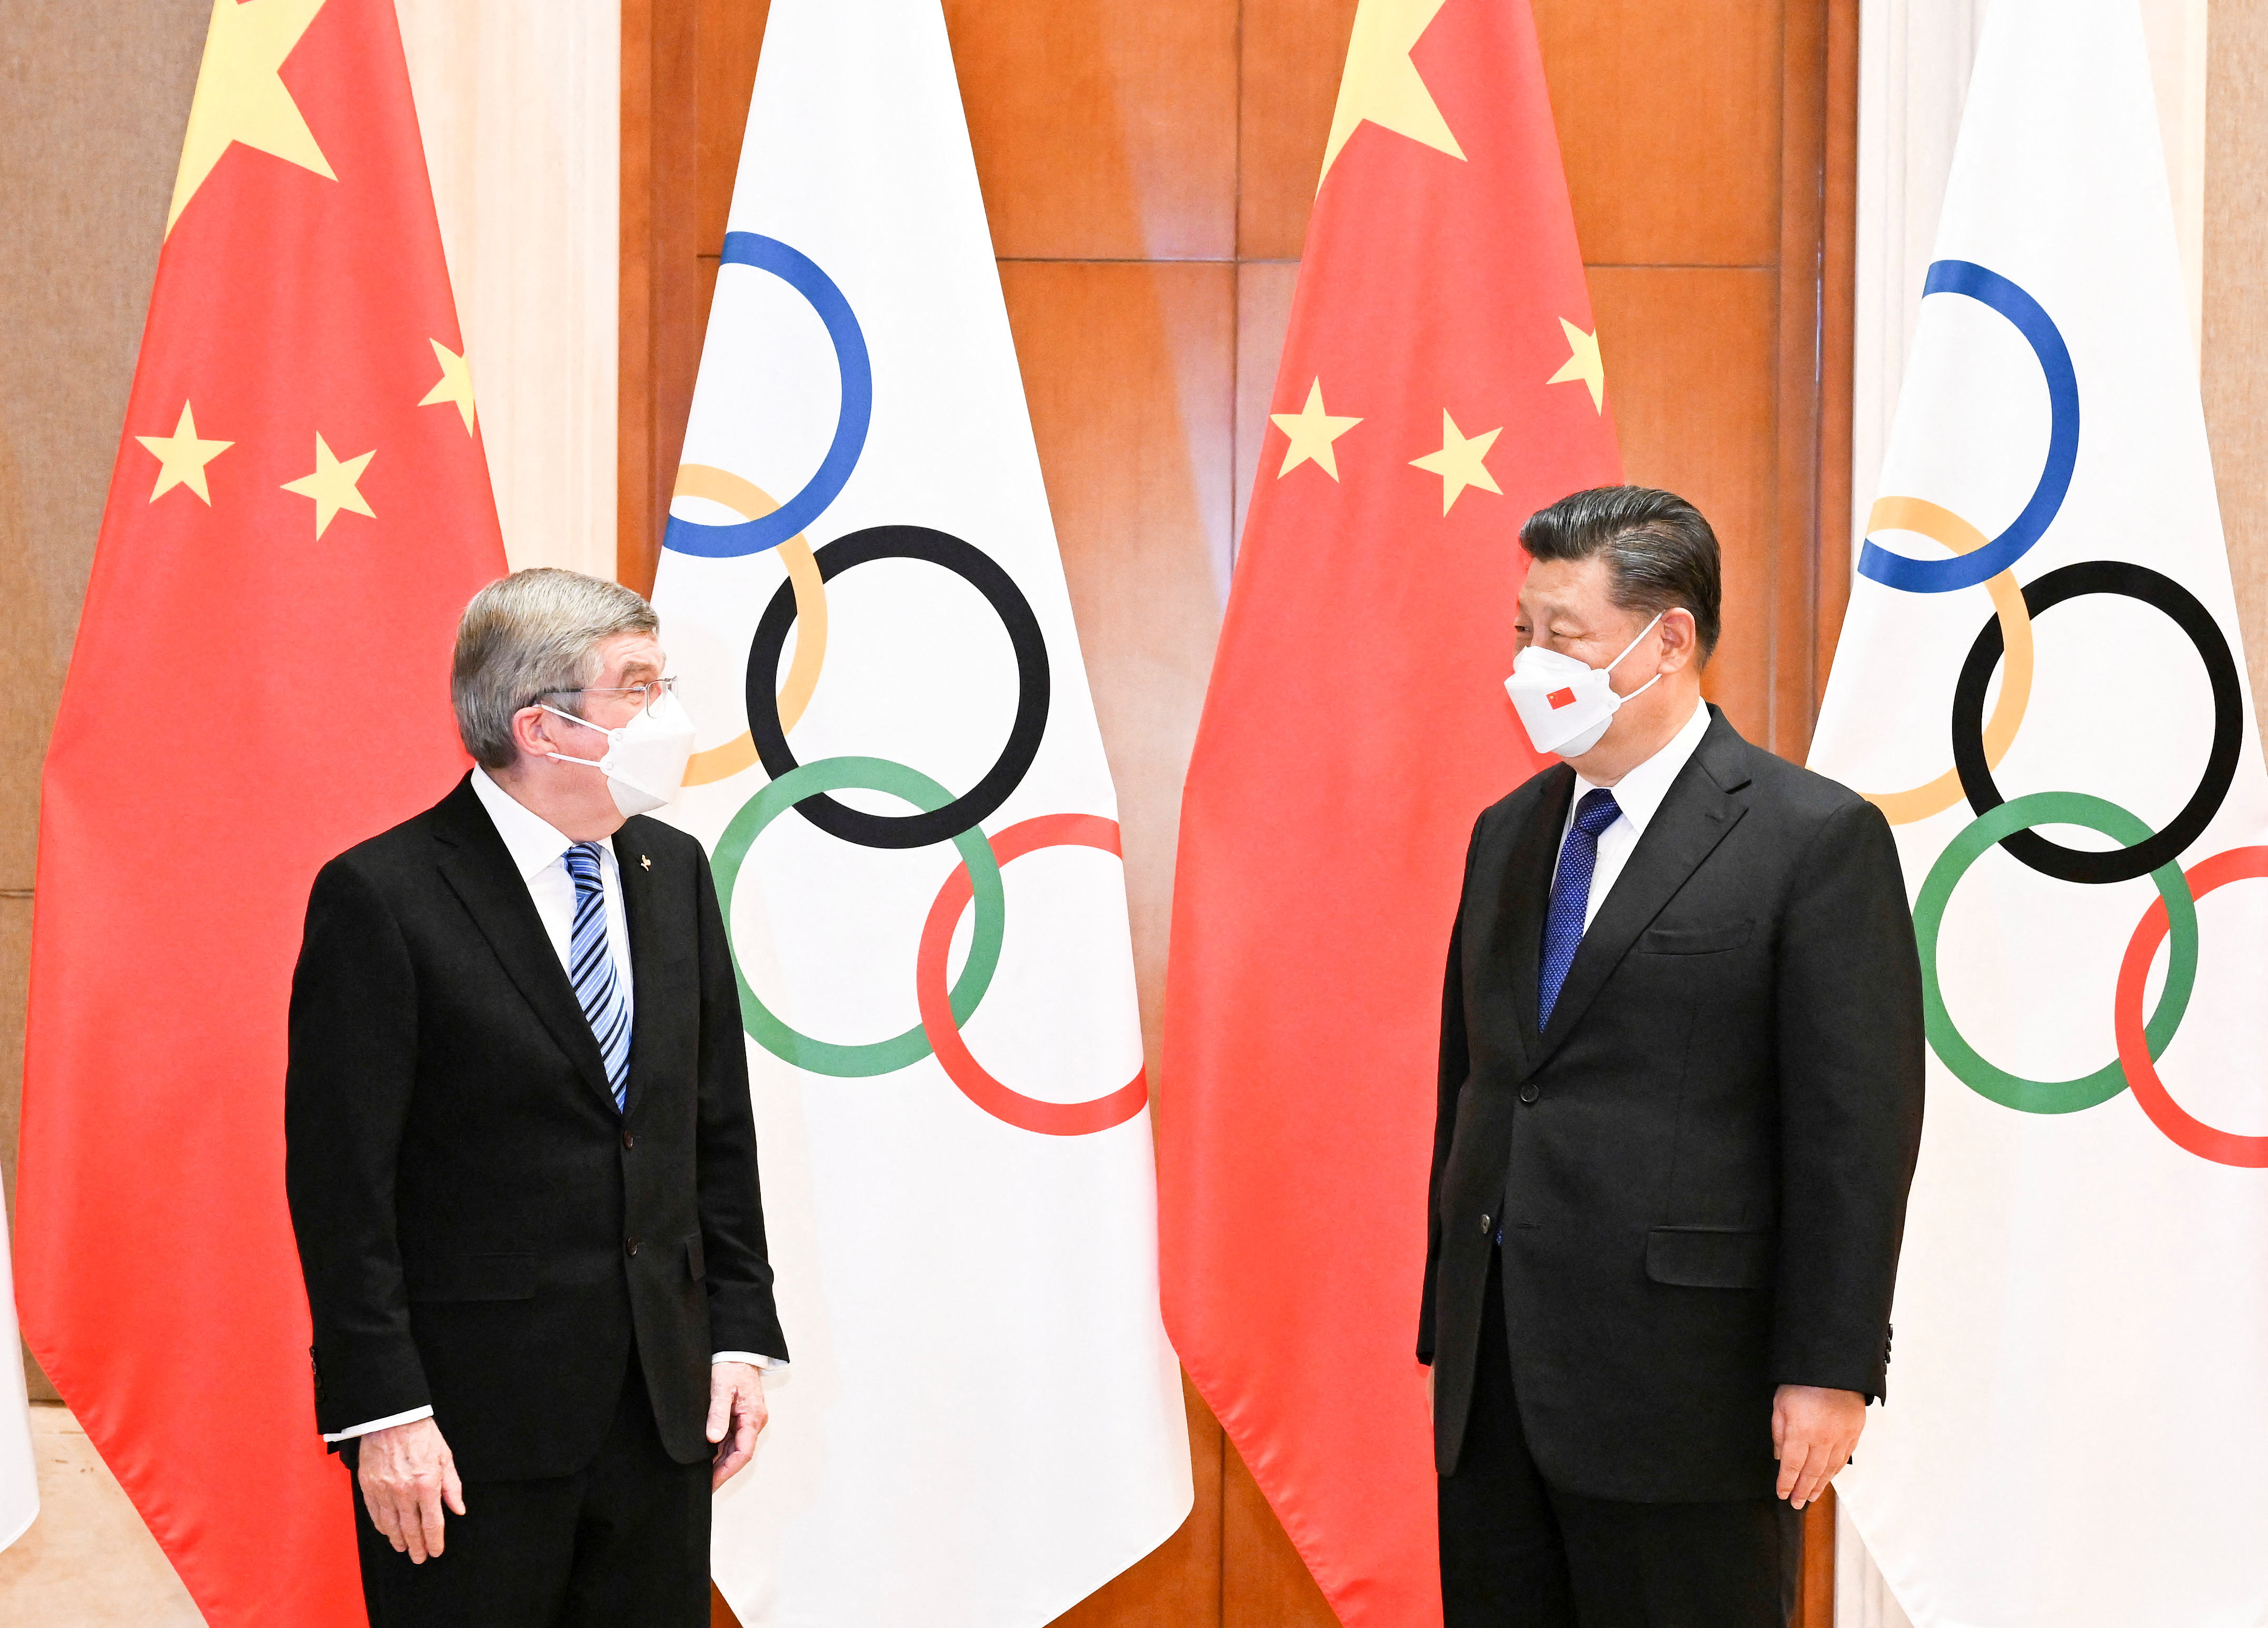 Chinese President Xi Jinping meets with International Olympic Committee (IOC) President Thomas Bach at the Diaoyutai State Guesthouse in Beijing, China January 25, 2022. Picture taken January 25, 2022. Zhang Ling/Xinhua via REUTERS   ATTENTION EDITORS - THIS IMAGE WAS PROVIDED BY A THIRD PARTY. CHINA OUT. NO RESALES. NO ARCHIVES.